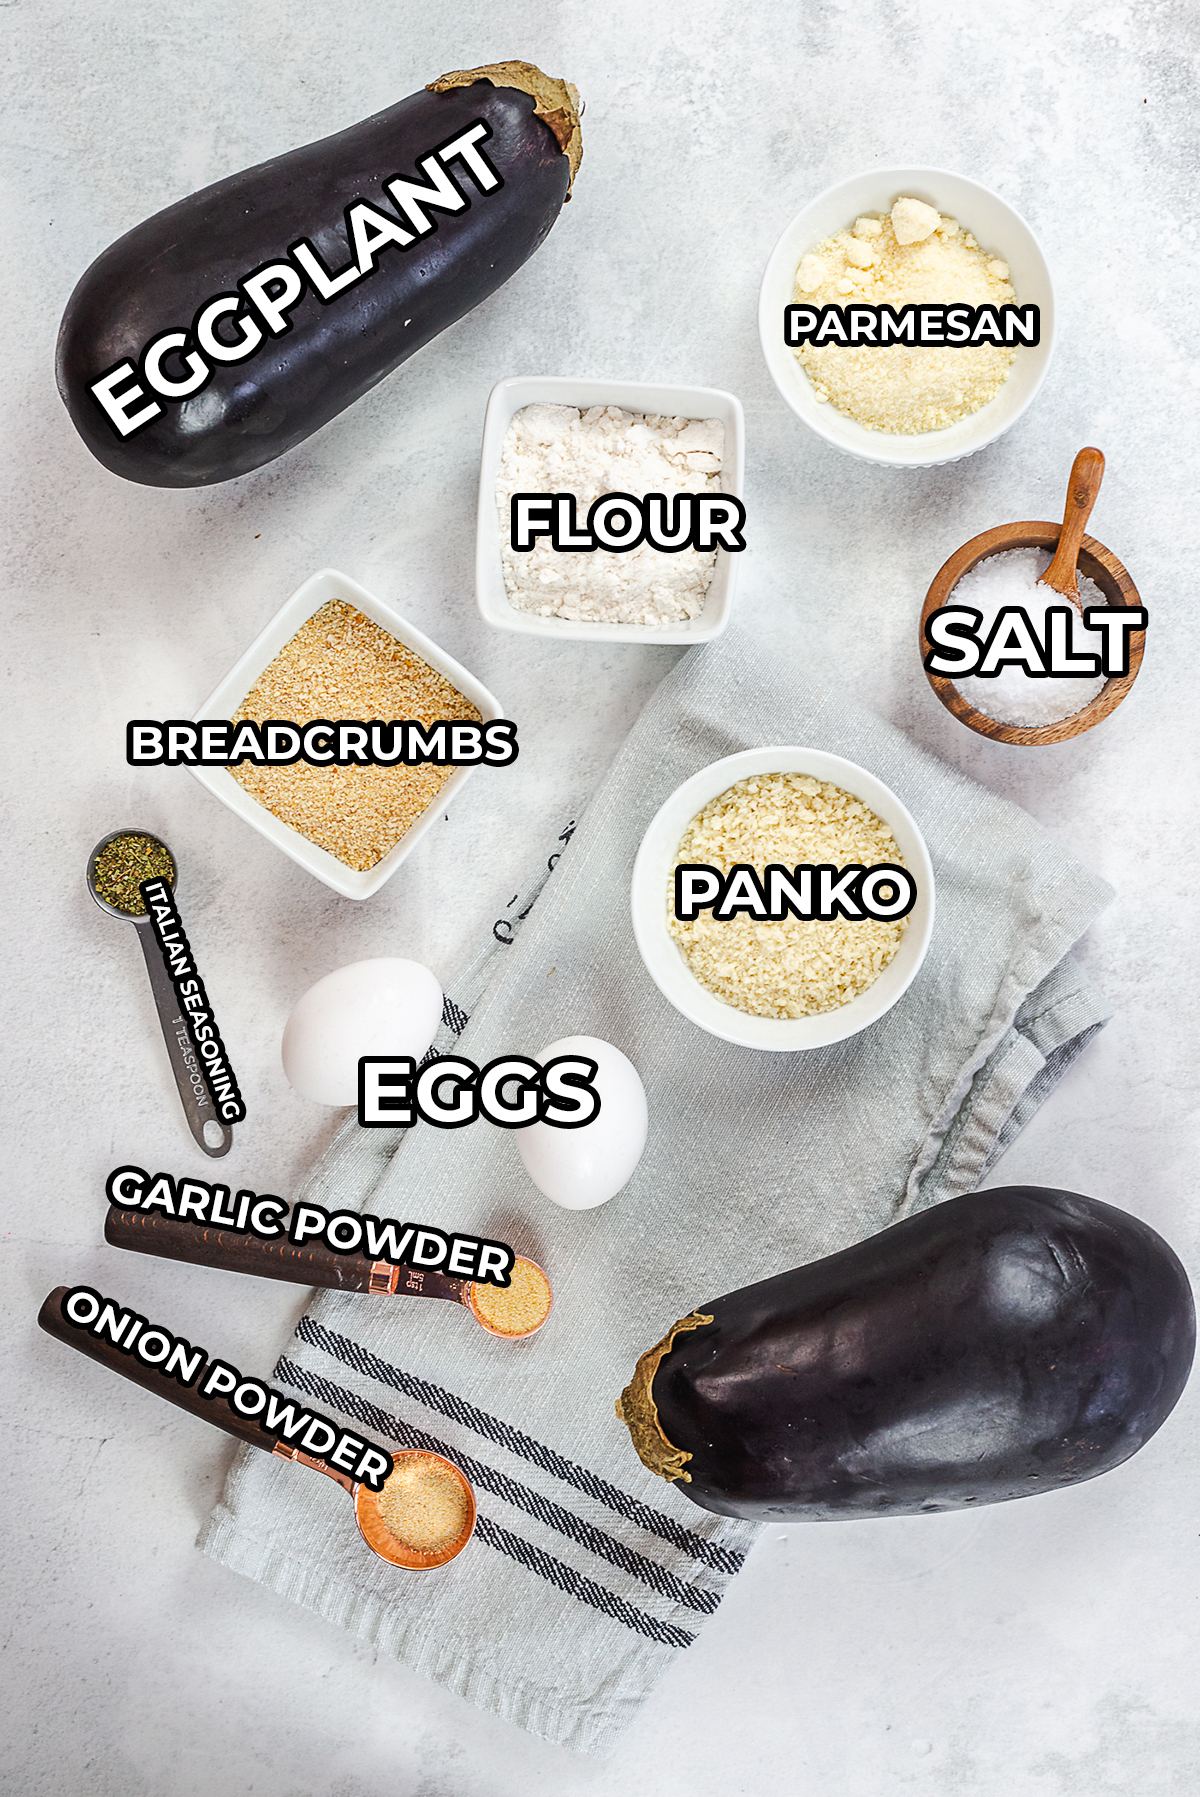 Ingredients for fried egg plant spread on a counter